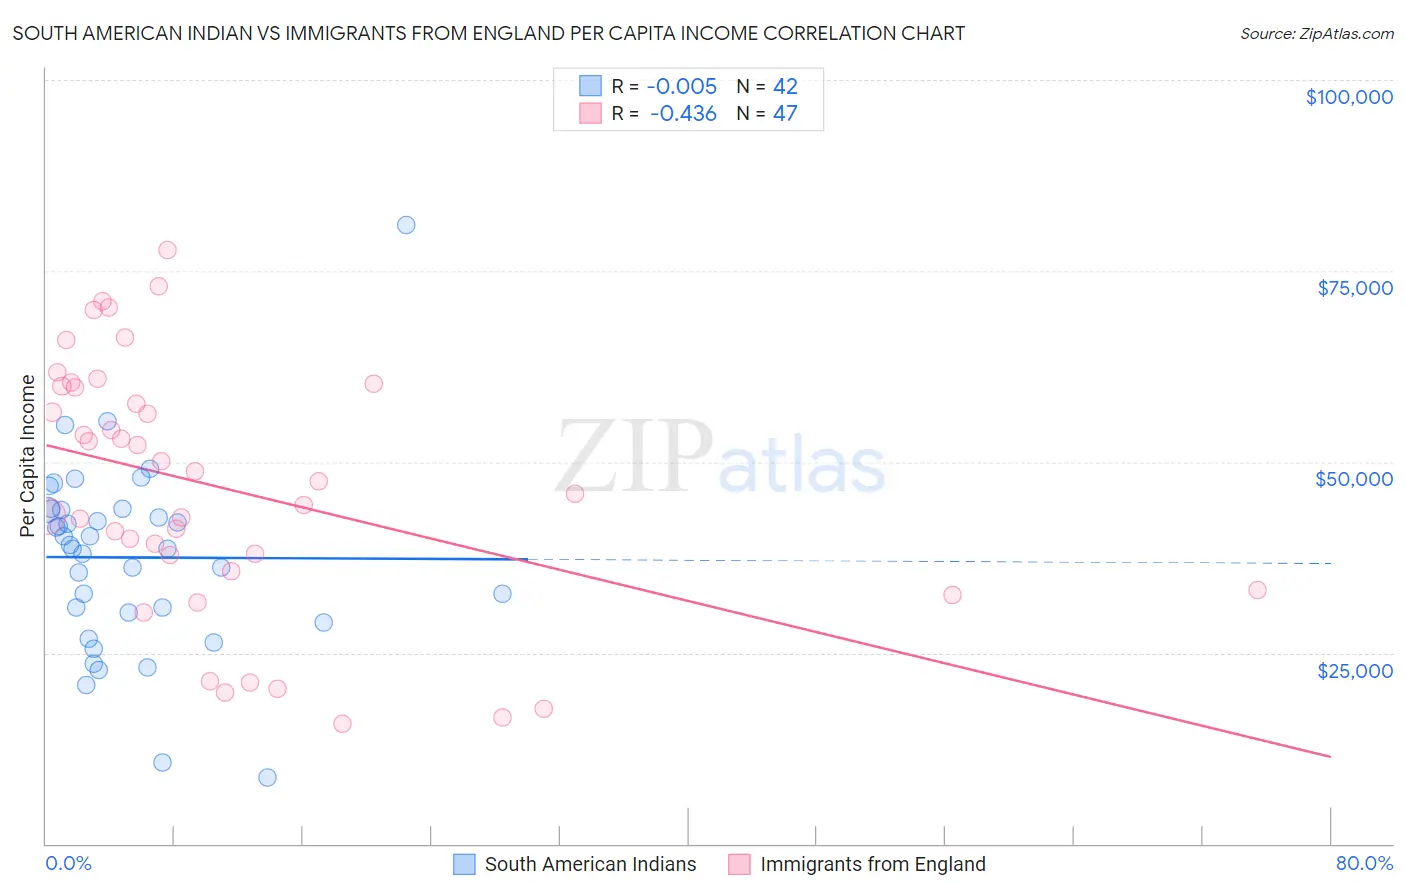 South American Indian vs Immigrants from England Per Capita Income